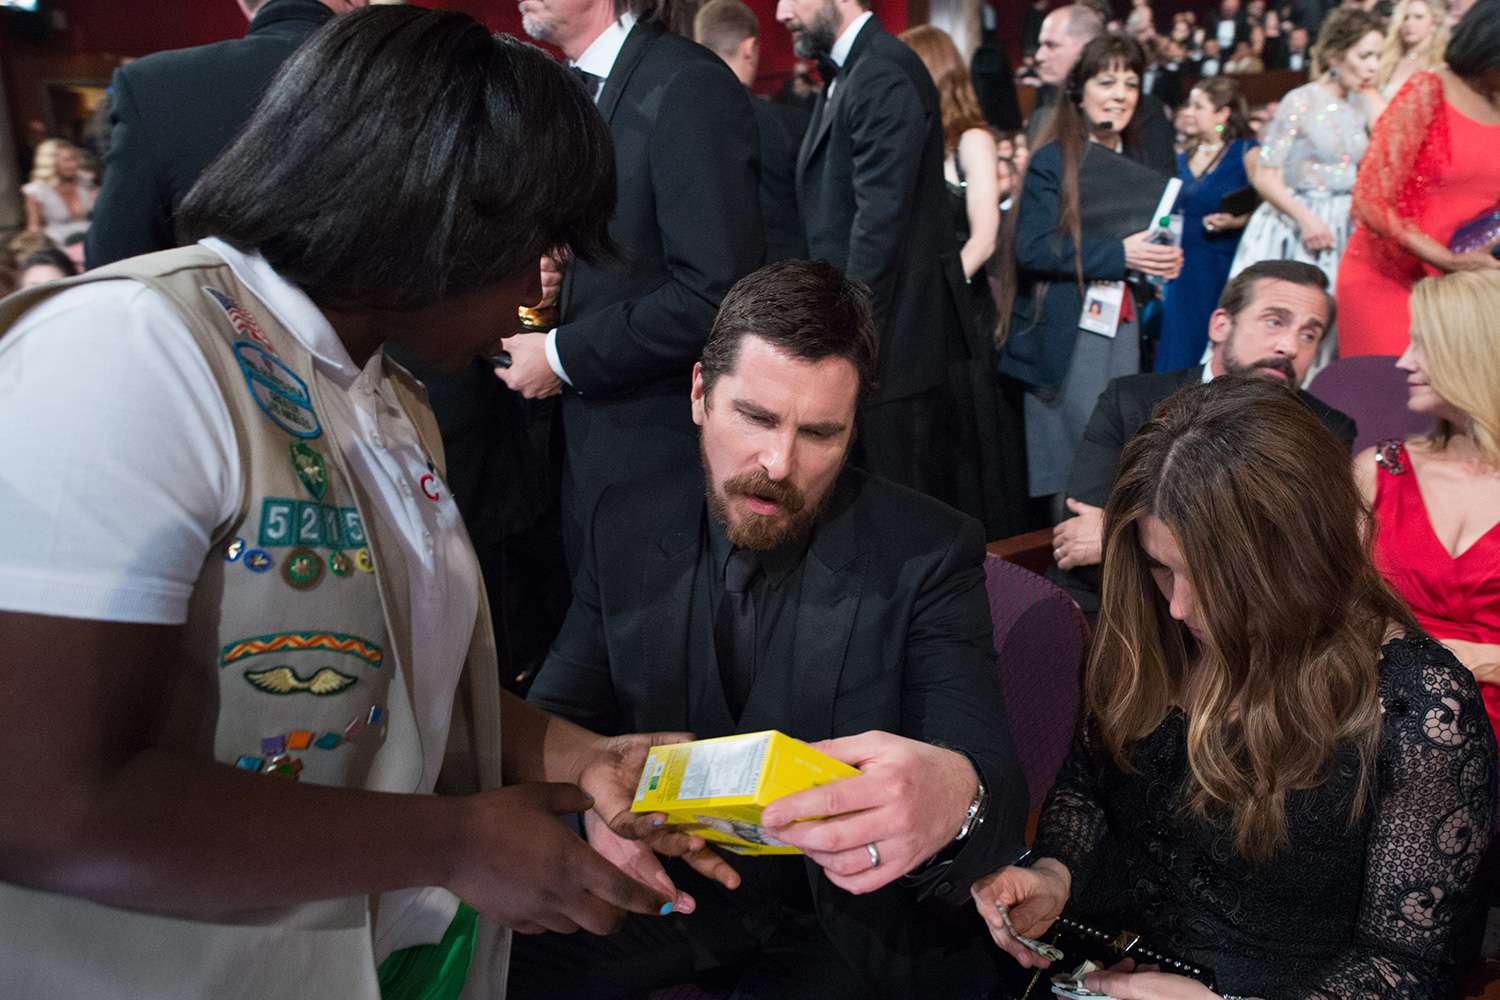 Oscar&reg;-nominee Christian Bale and Sibi Blazic buy Girl Scout Cookies during the live ABC Telecast of The 88th Oscars&reg; at the Dolby&reg; Theatre in Hollywood, CA on Sunday, February 28, 2016.